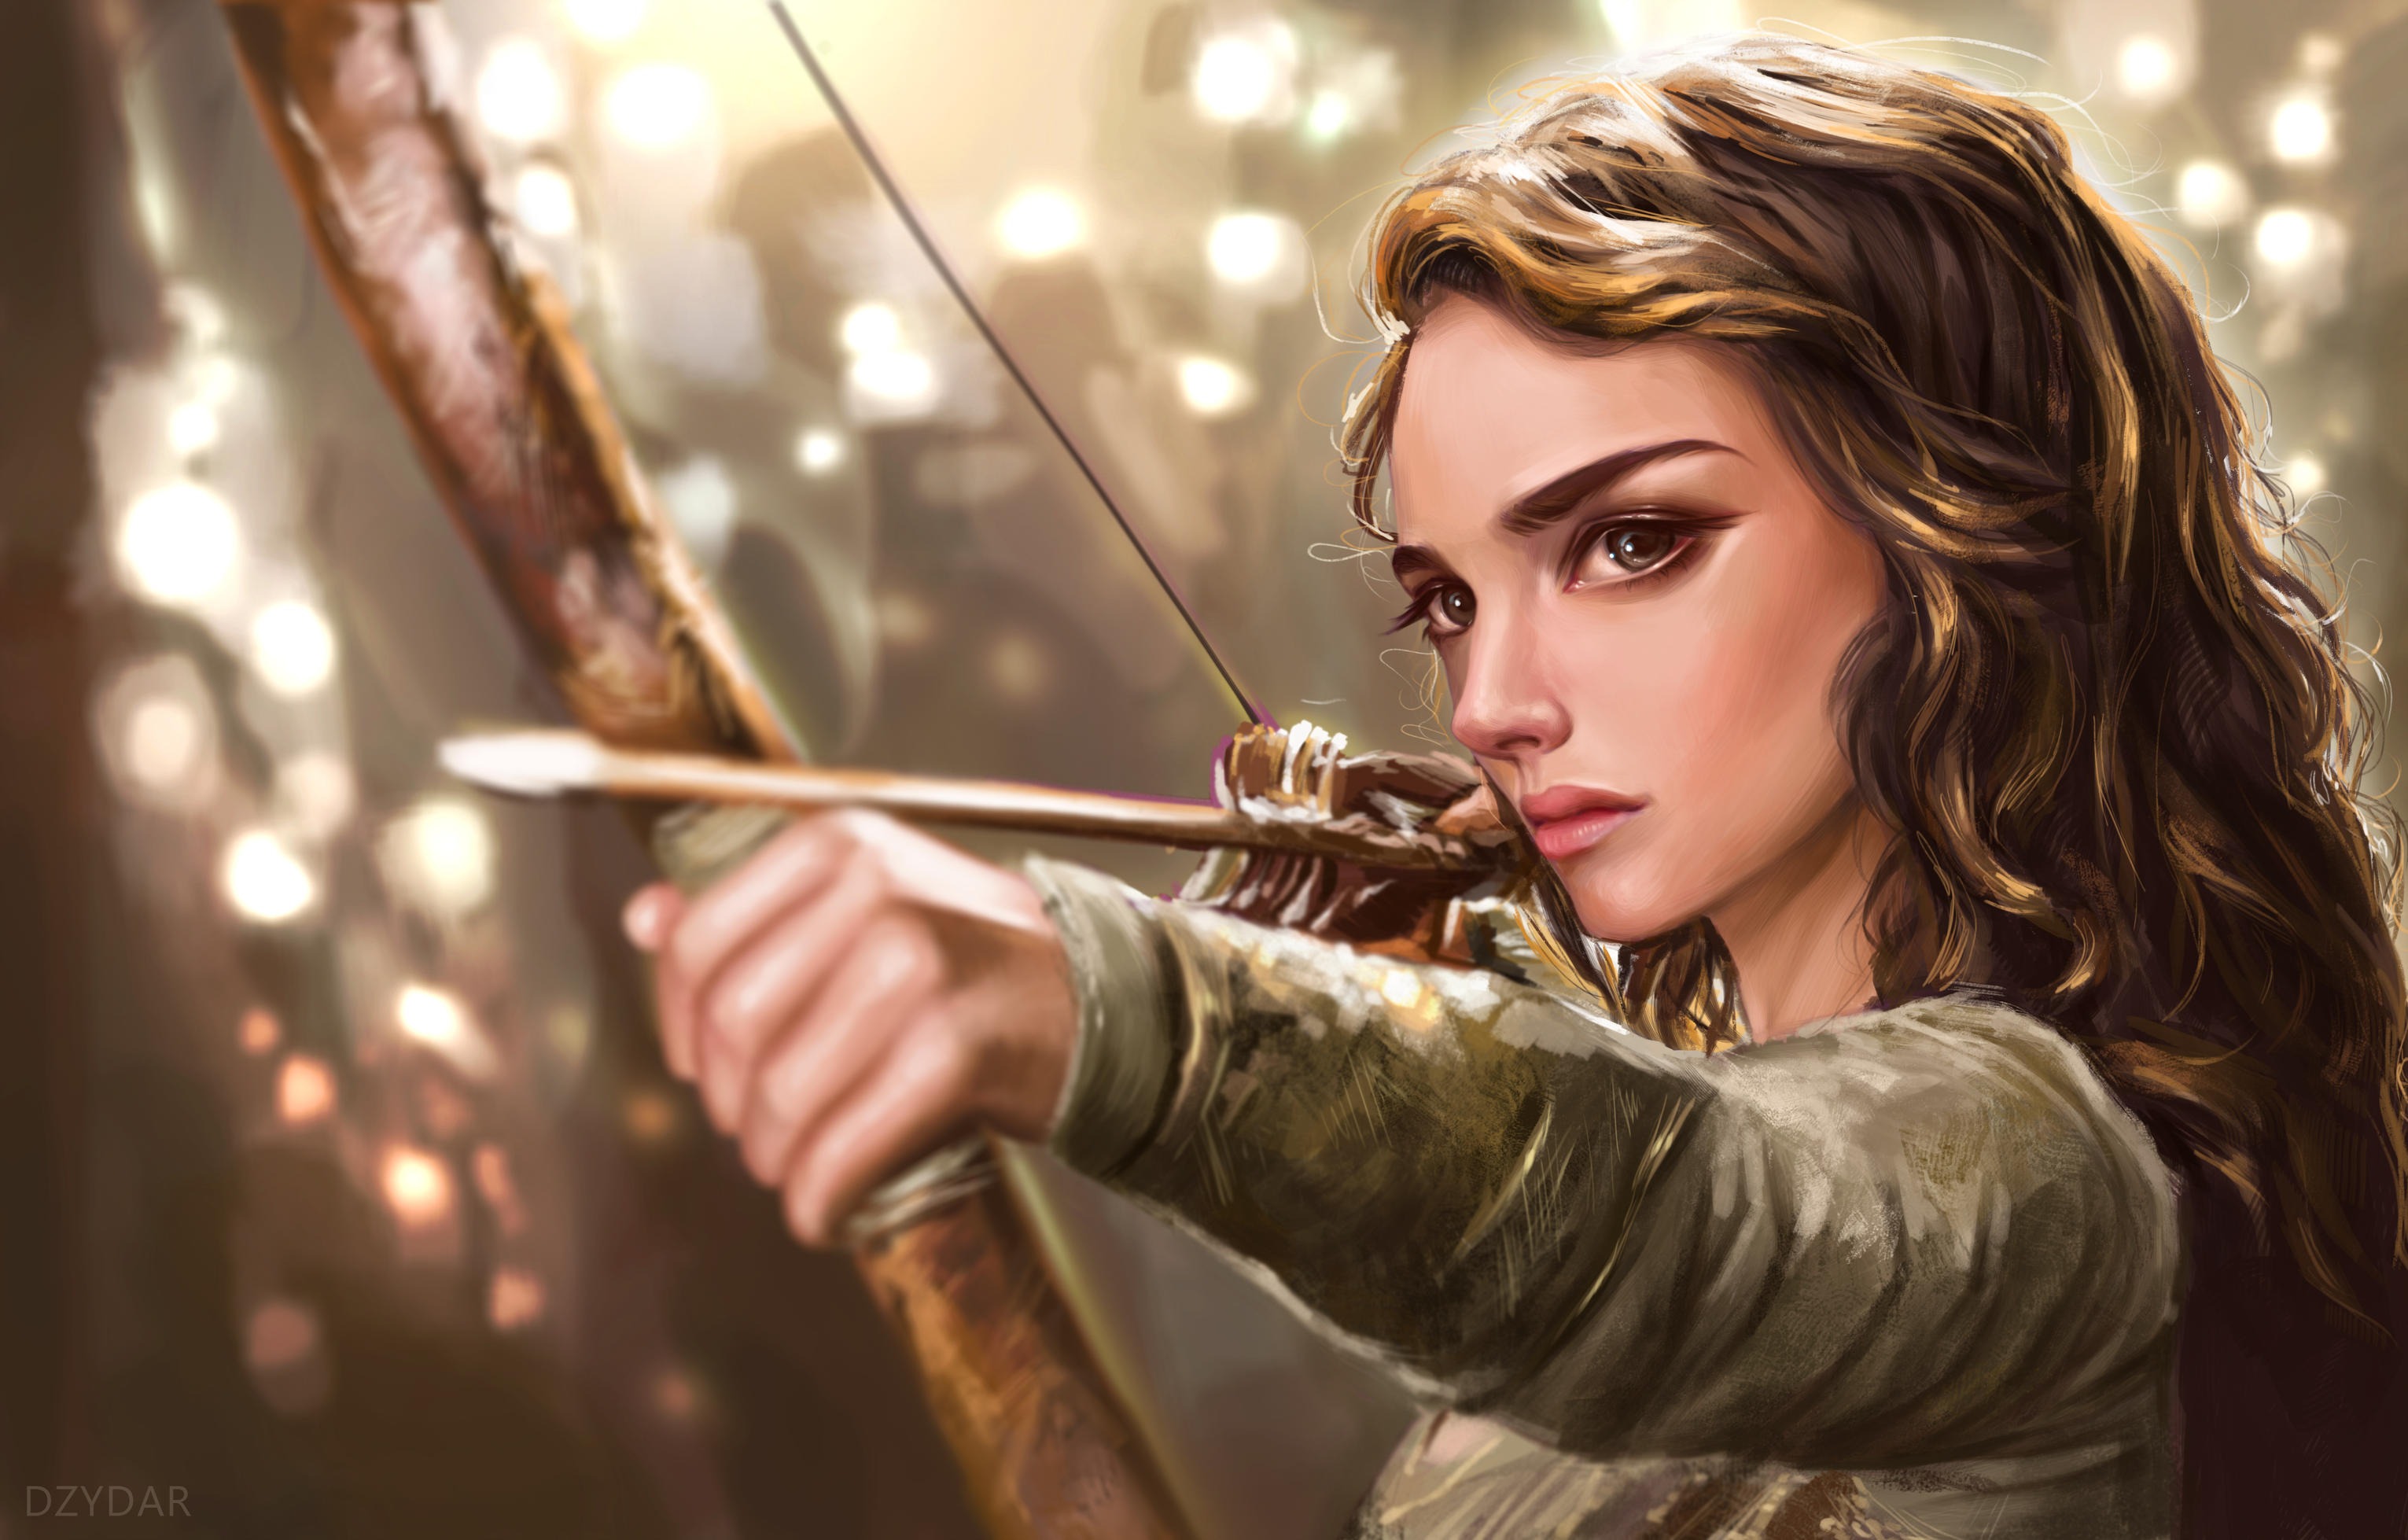 Archer girl hd artist k wallpapers images backgrounds photos and pictures